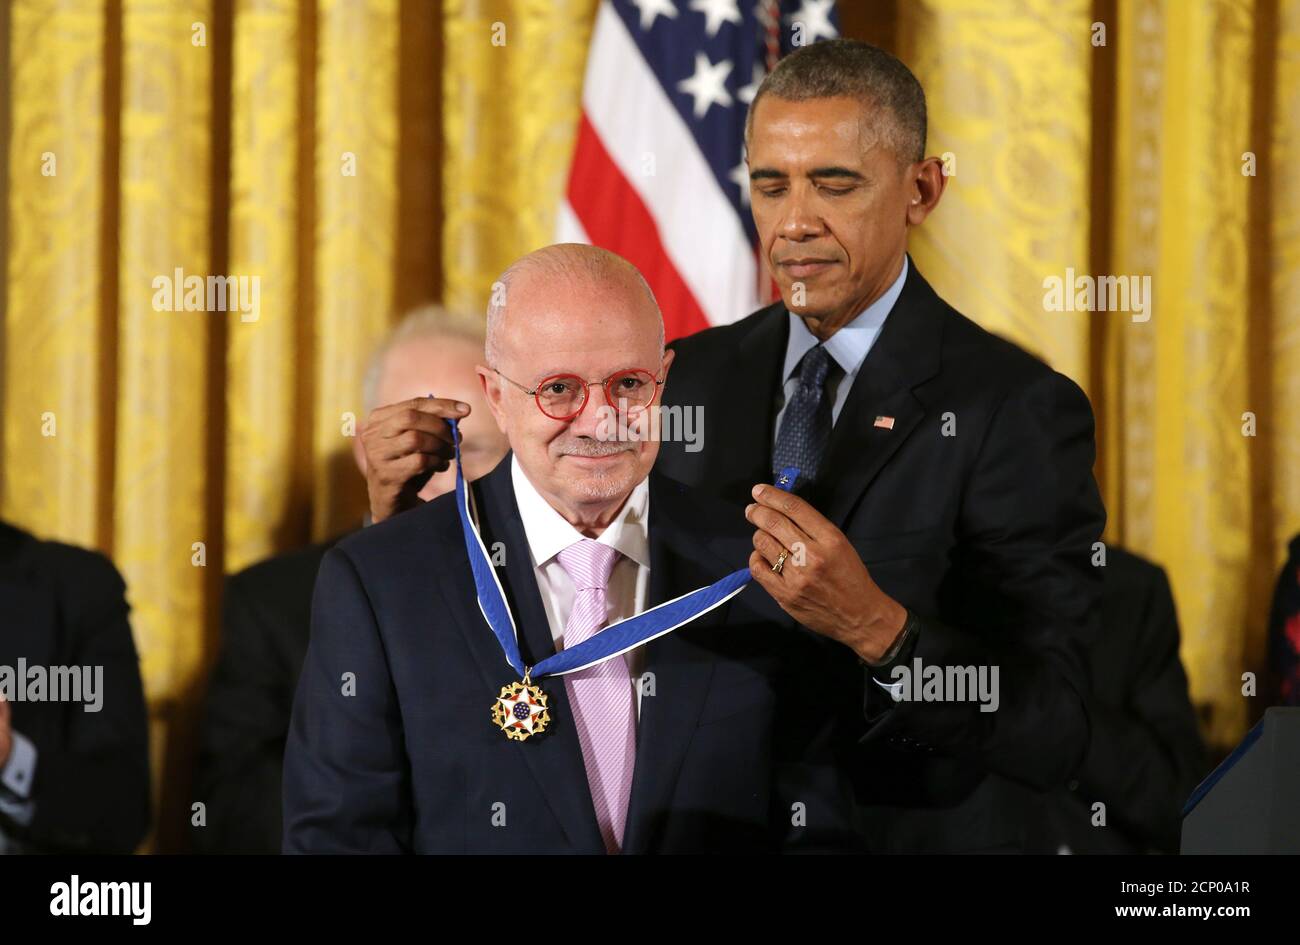 U.S. President Barack Obama awards the President of Miami Dade College Eduardo Padron the Presidential Medal of Freedom during a ceremony in the East Room of  the White House in Washington, U.S., November 22, 2016.        REUTERS/Carlos Barria Stock Photo